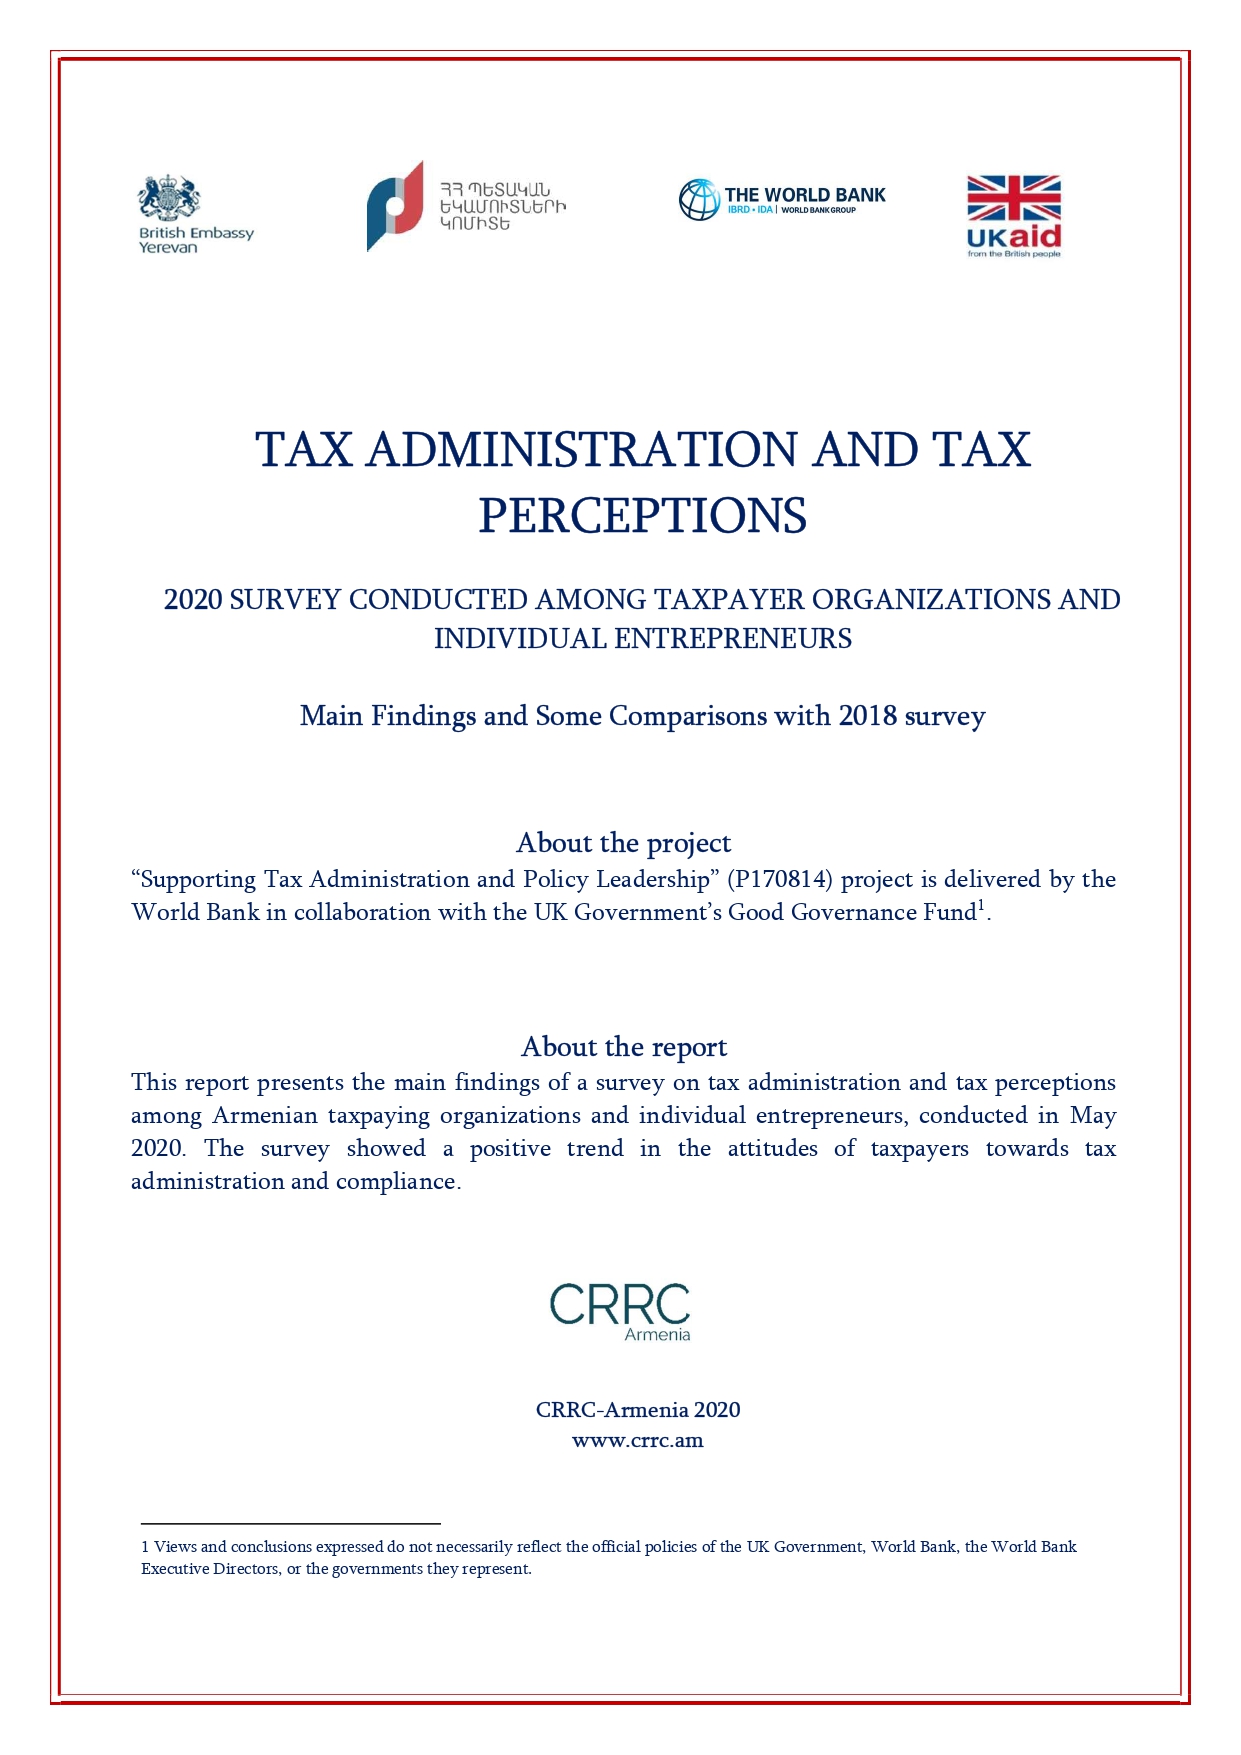 Tax Administration and Tax Perceptions